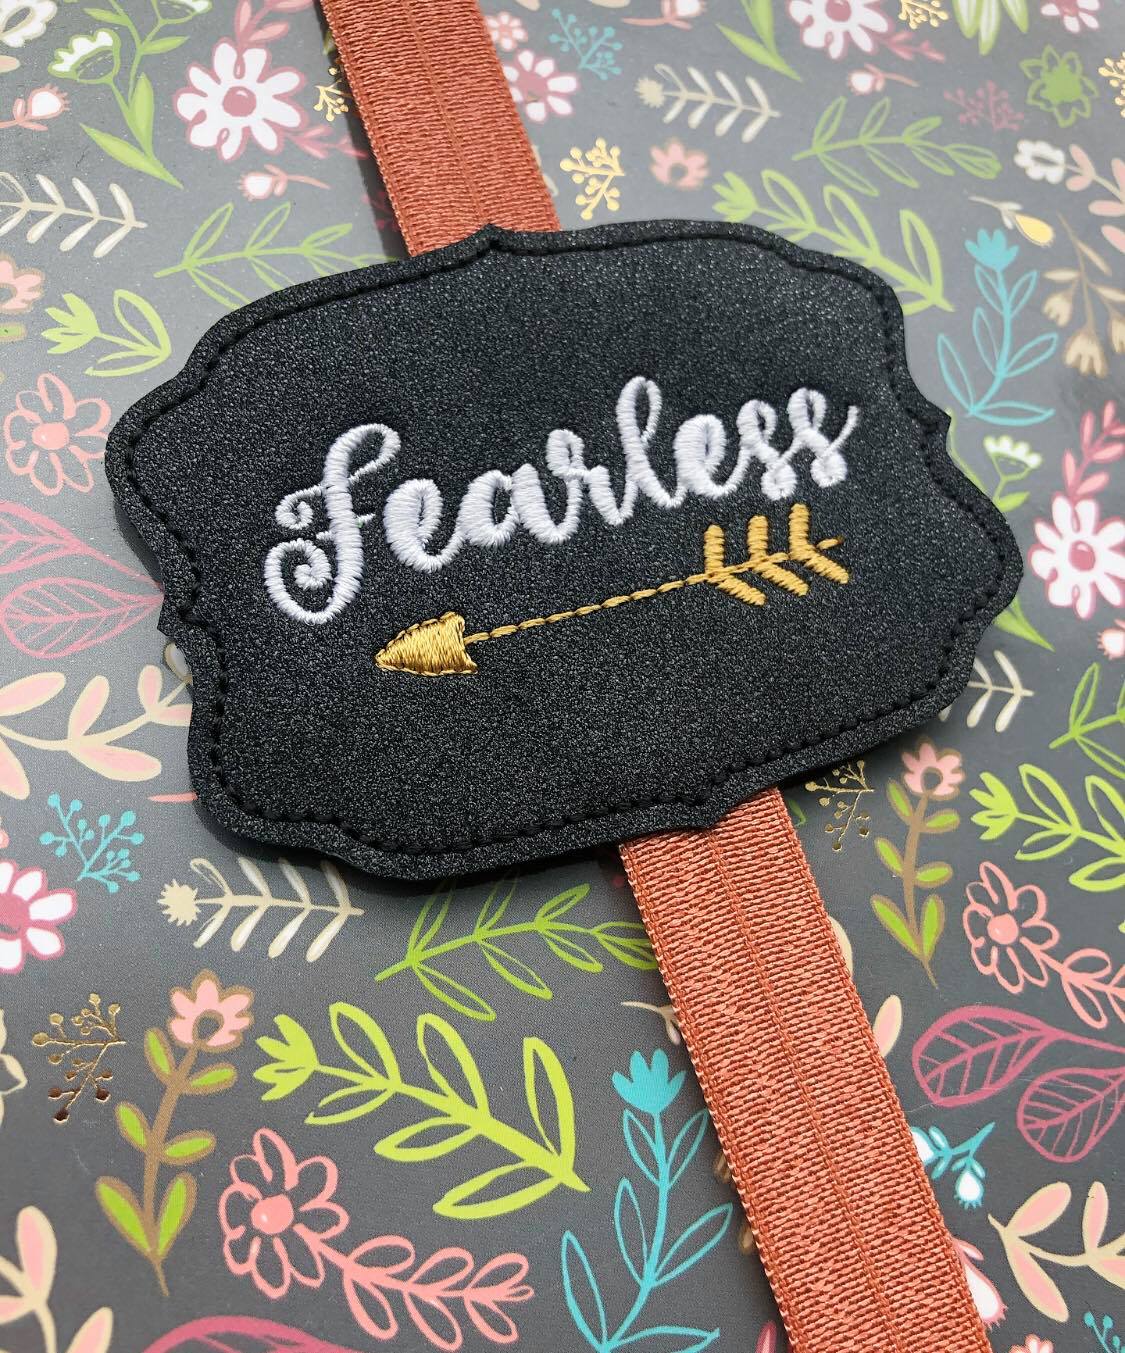 Fearless - Book Band - Digital Embroidery Design